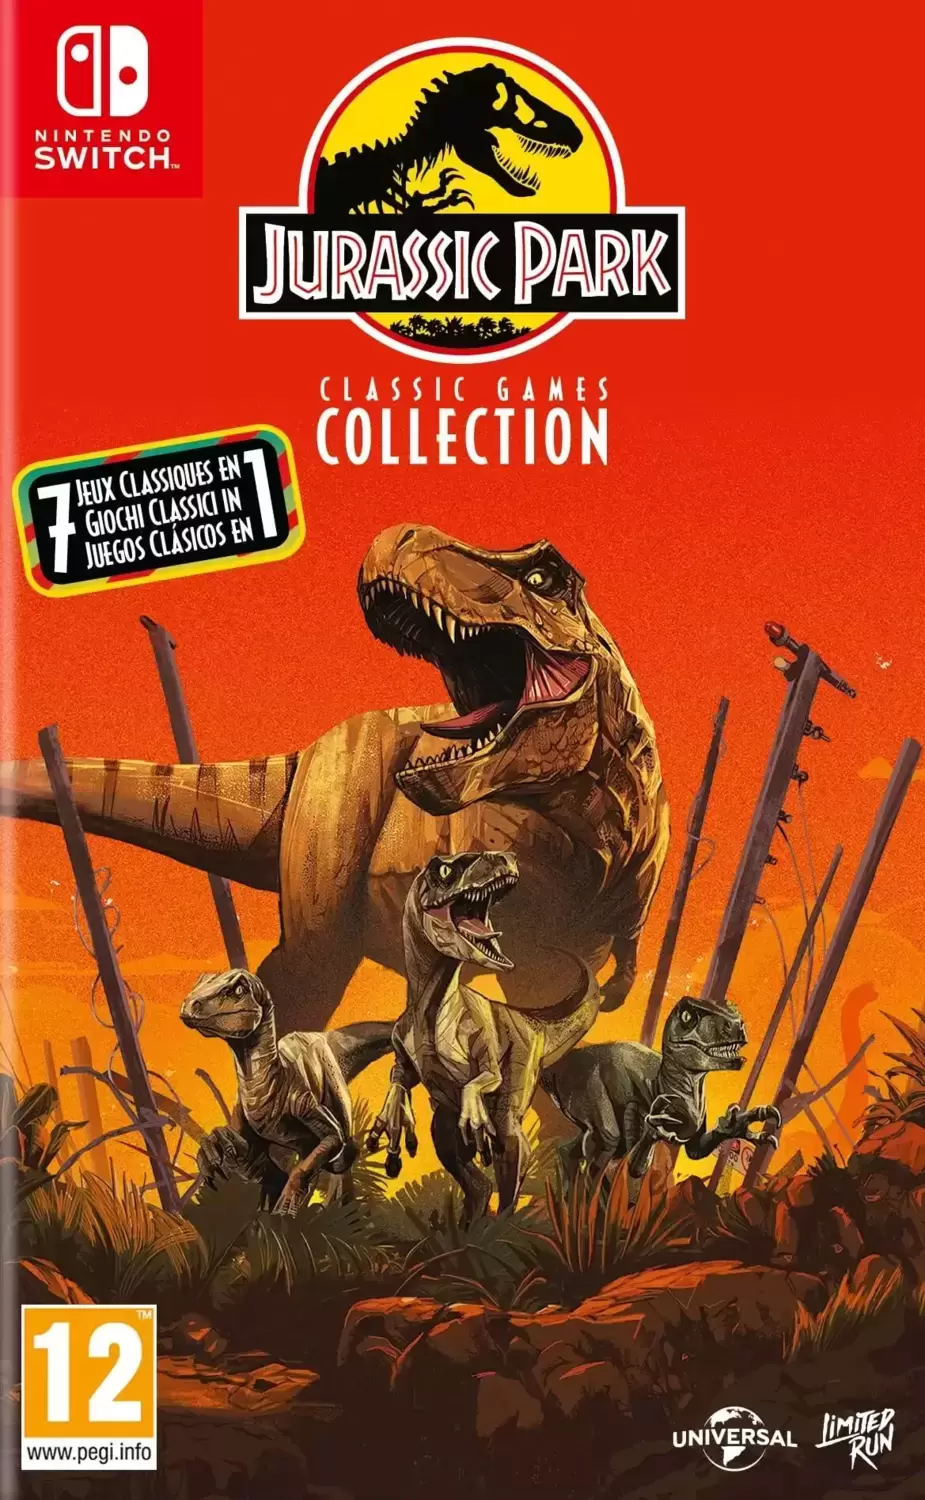 Nintendo Switch Games - Jurassic Park Classic Games Collection